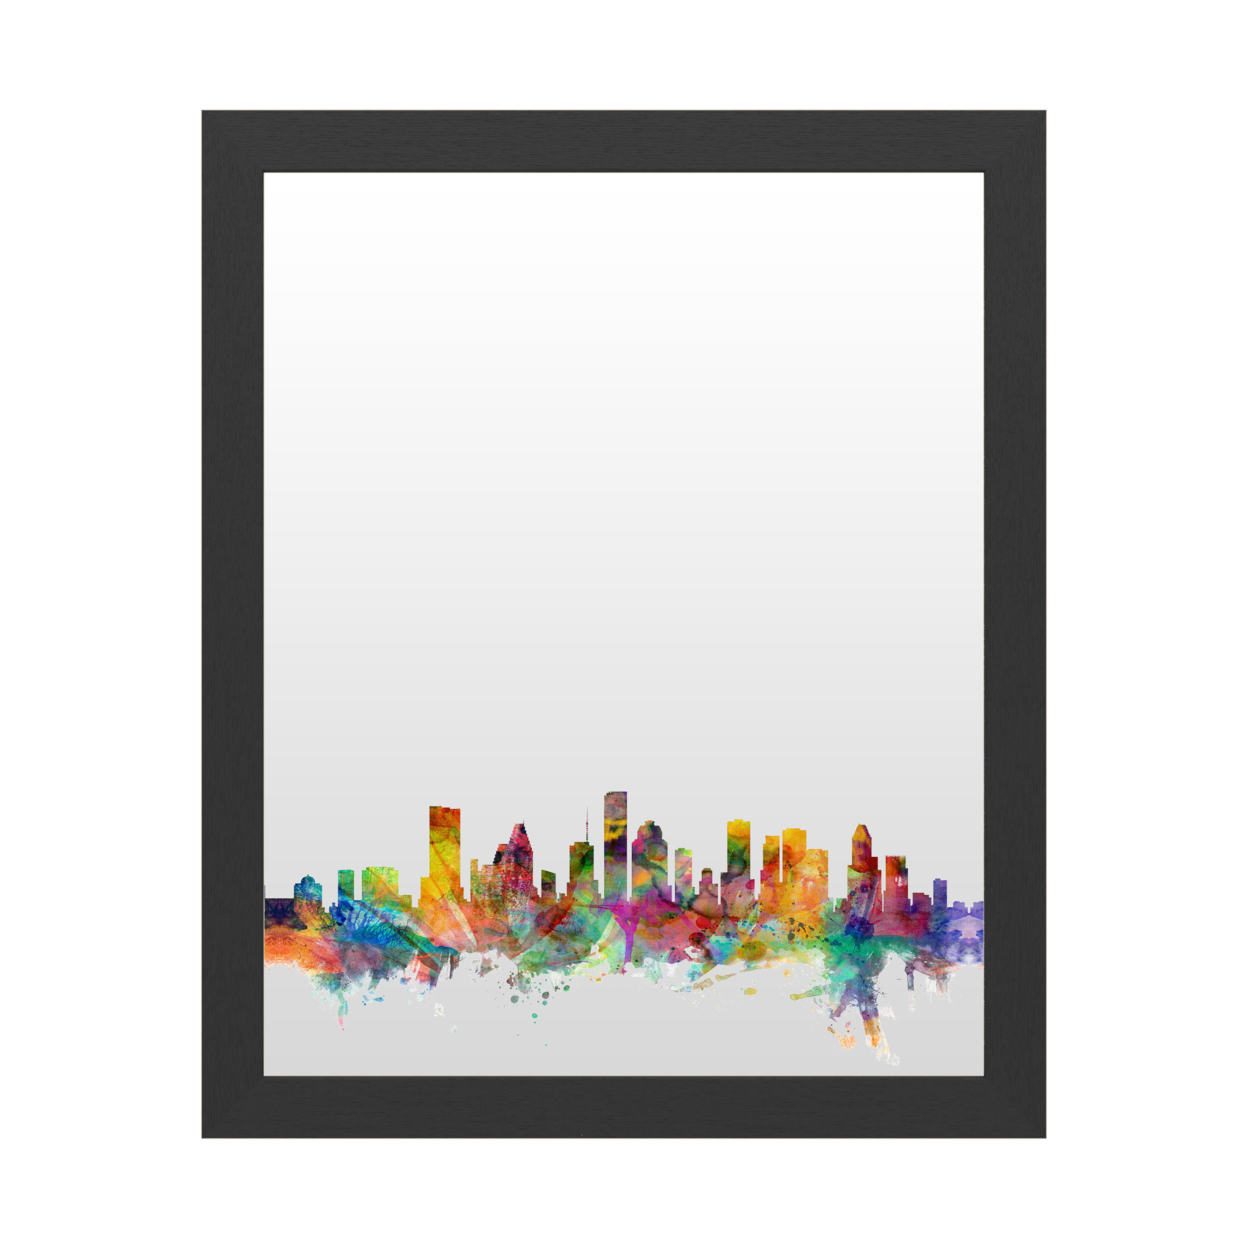 Dry Erase 16 X 20 Marker Board With Printed Artwork - Michael Tompsett Houston Texas Skyline White Board - Ready To Hang